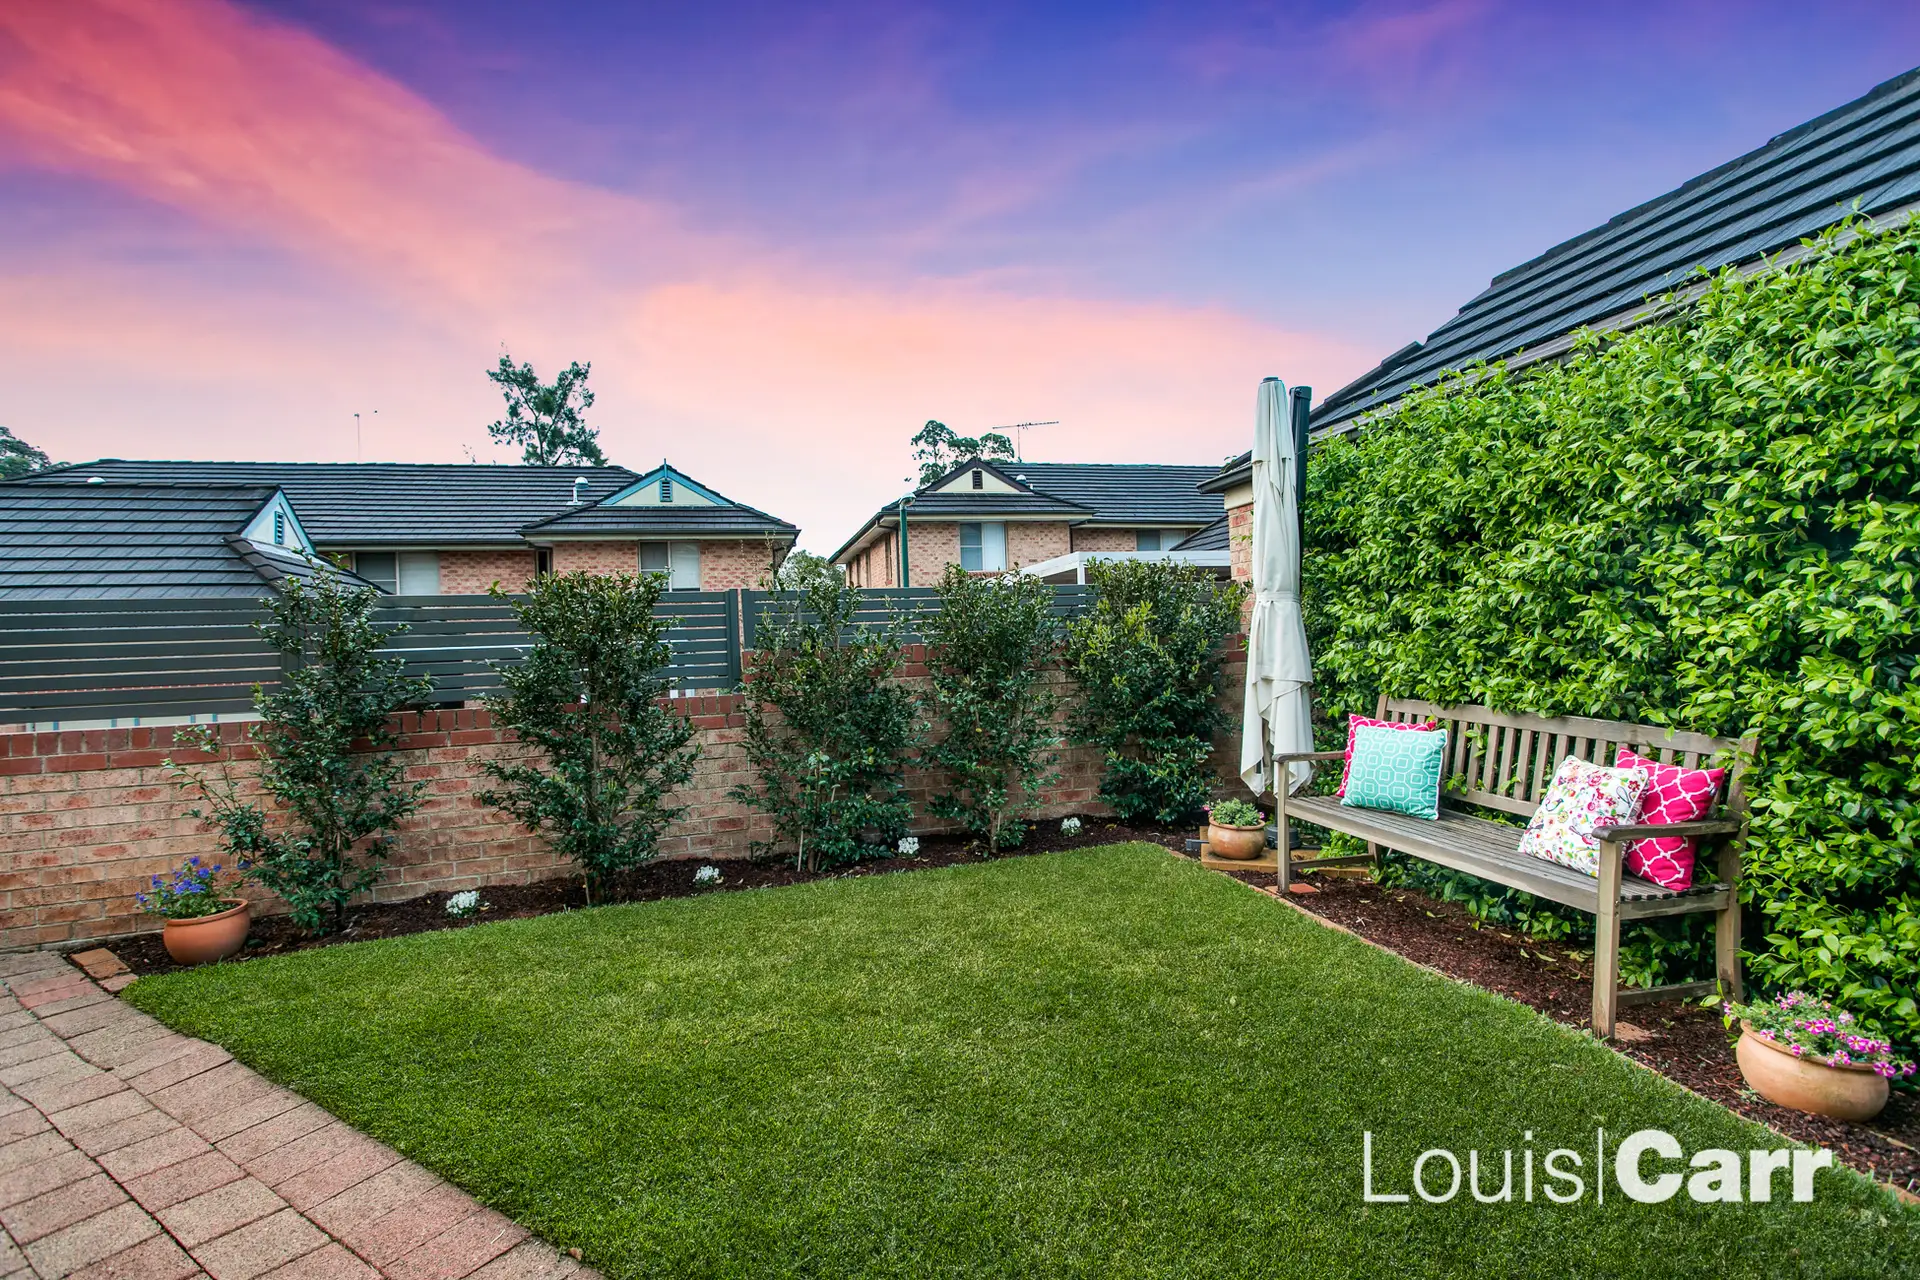 Photo #9: 22/8 View Street, West Pennant Hills - Sold by Louis Carr Real Estate